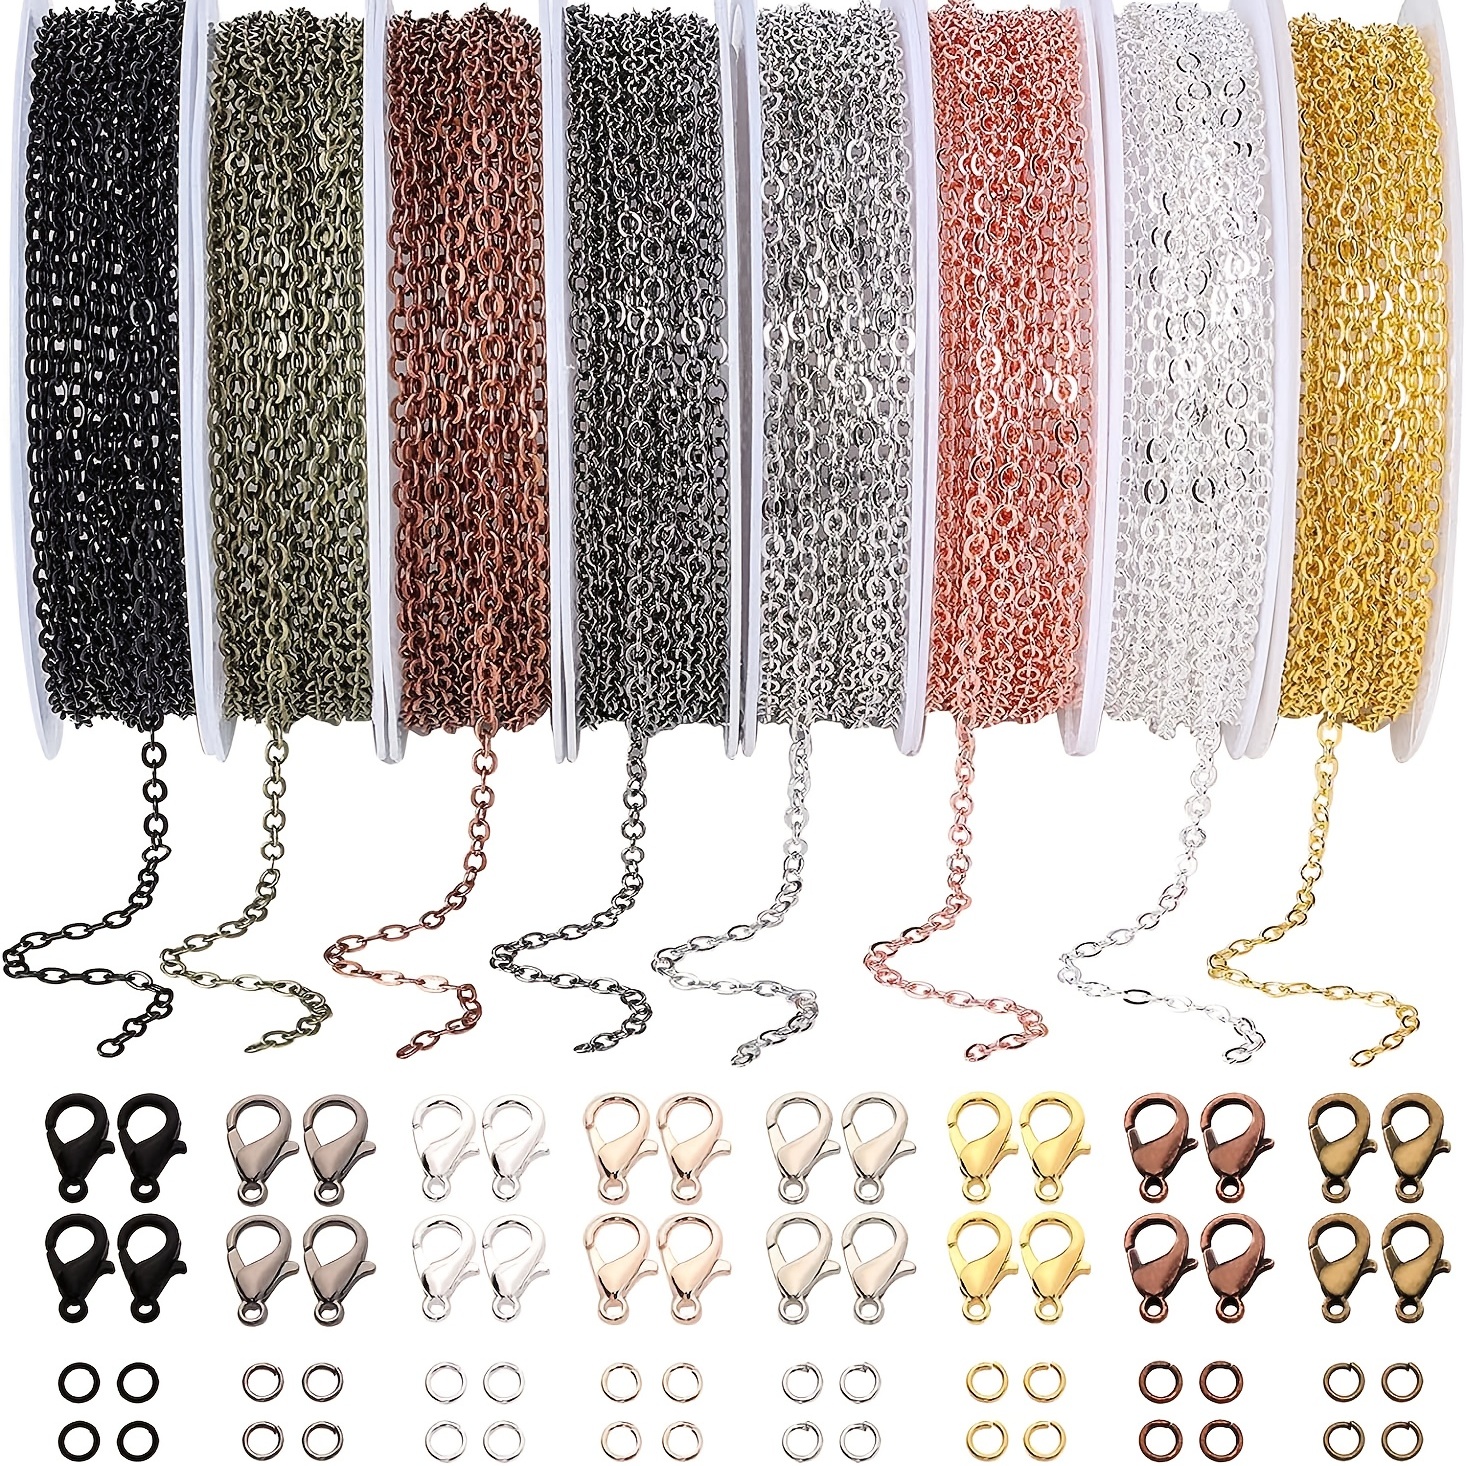 1077Pcs Jewelry Making Chains Kits 65 Feet DIY Necklace Chains for